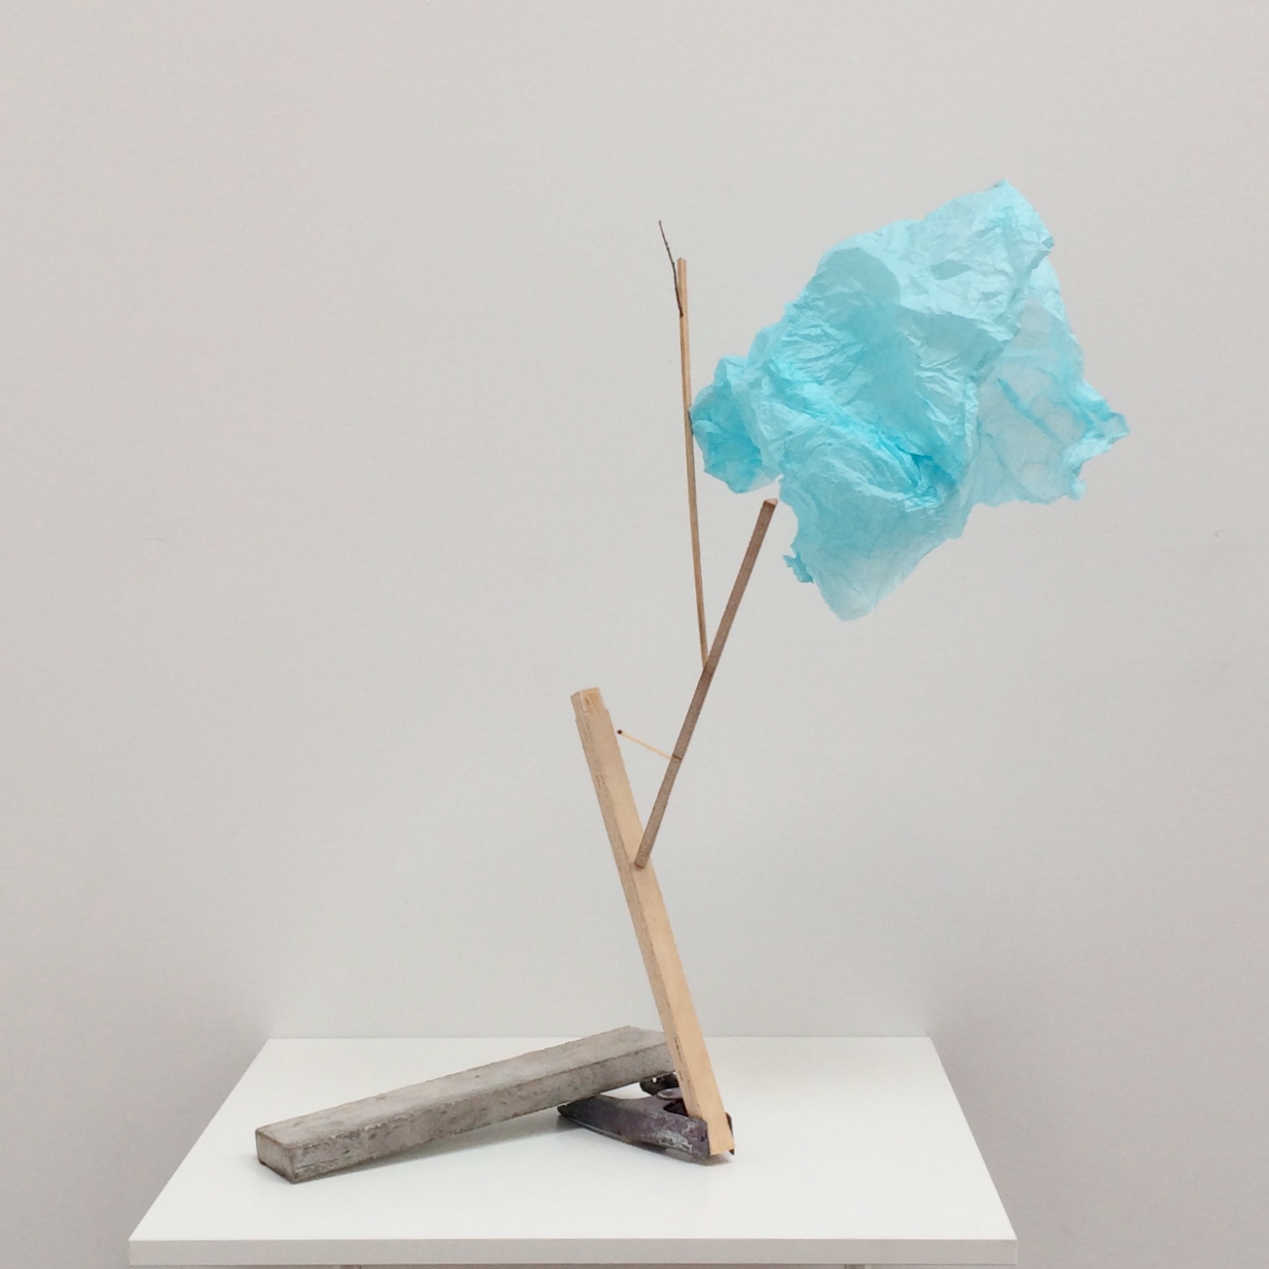   acot  &nbsp;2017 twigs, mixed media wood products, wrapping tissue, spring clamp, marble 22.25 x 24 x 18 inches 